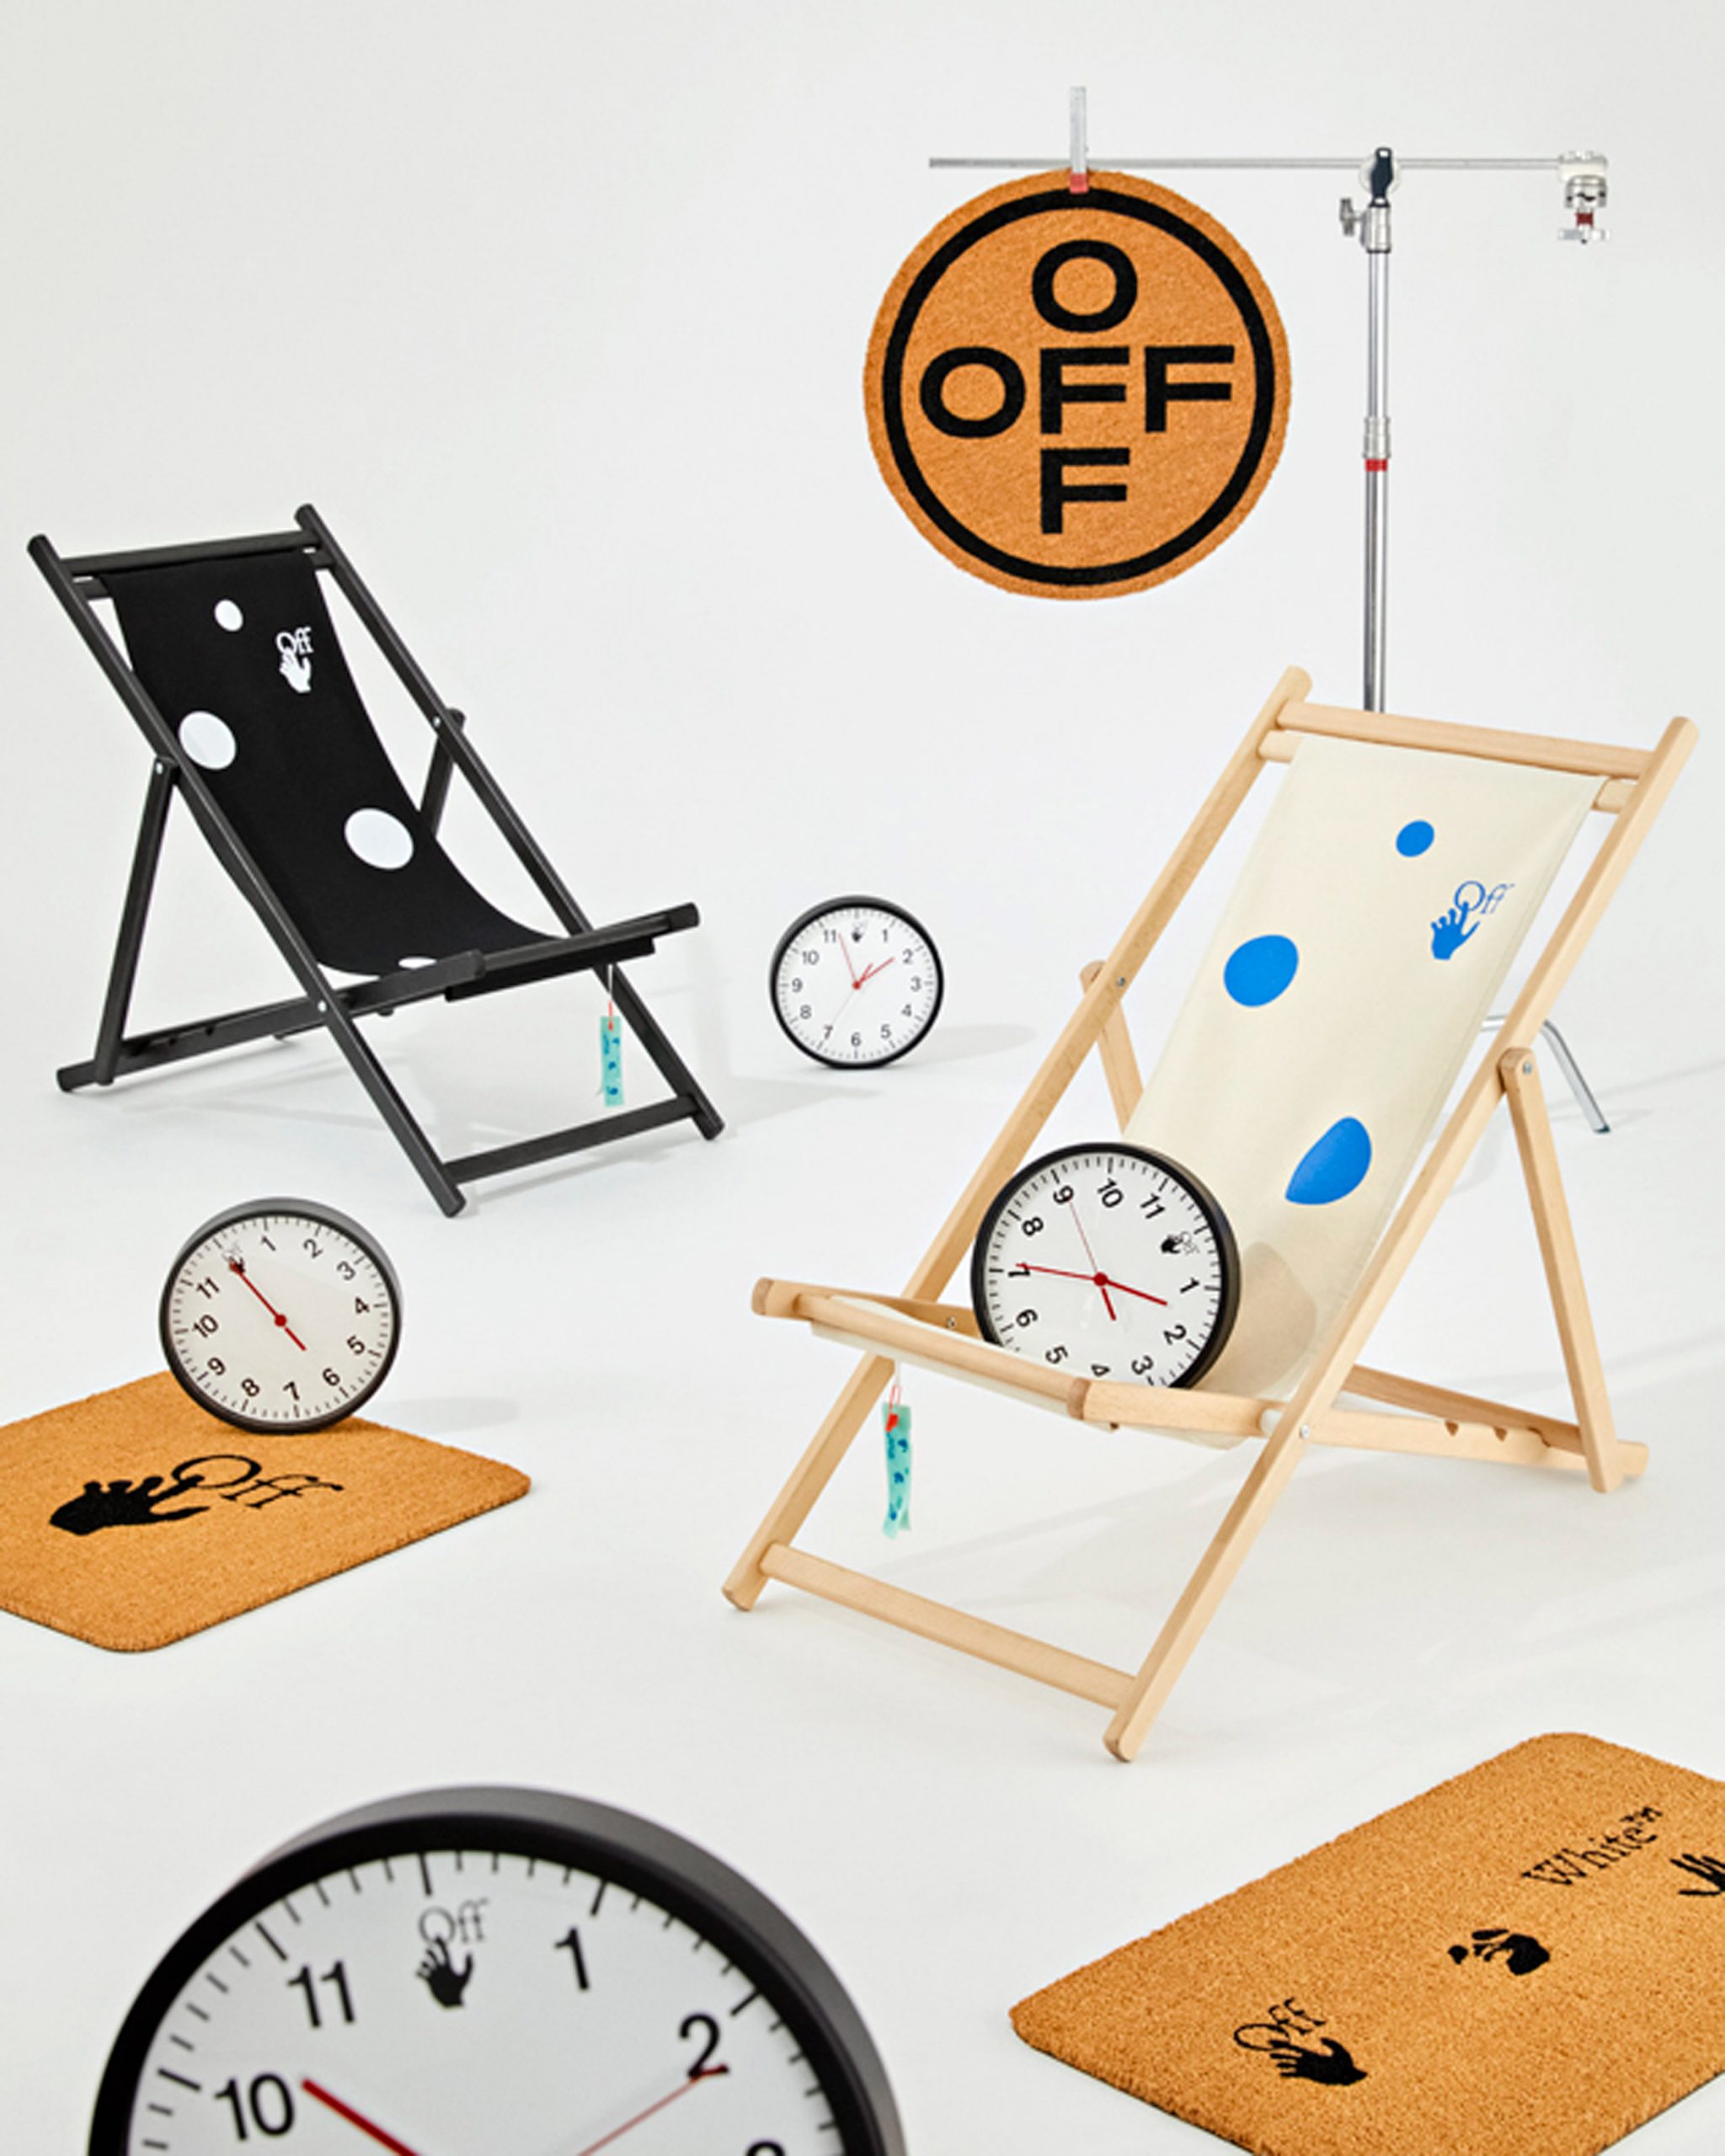 Doormats and clocks in HOME collection by Off-White